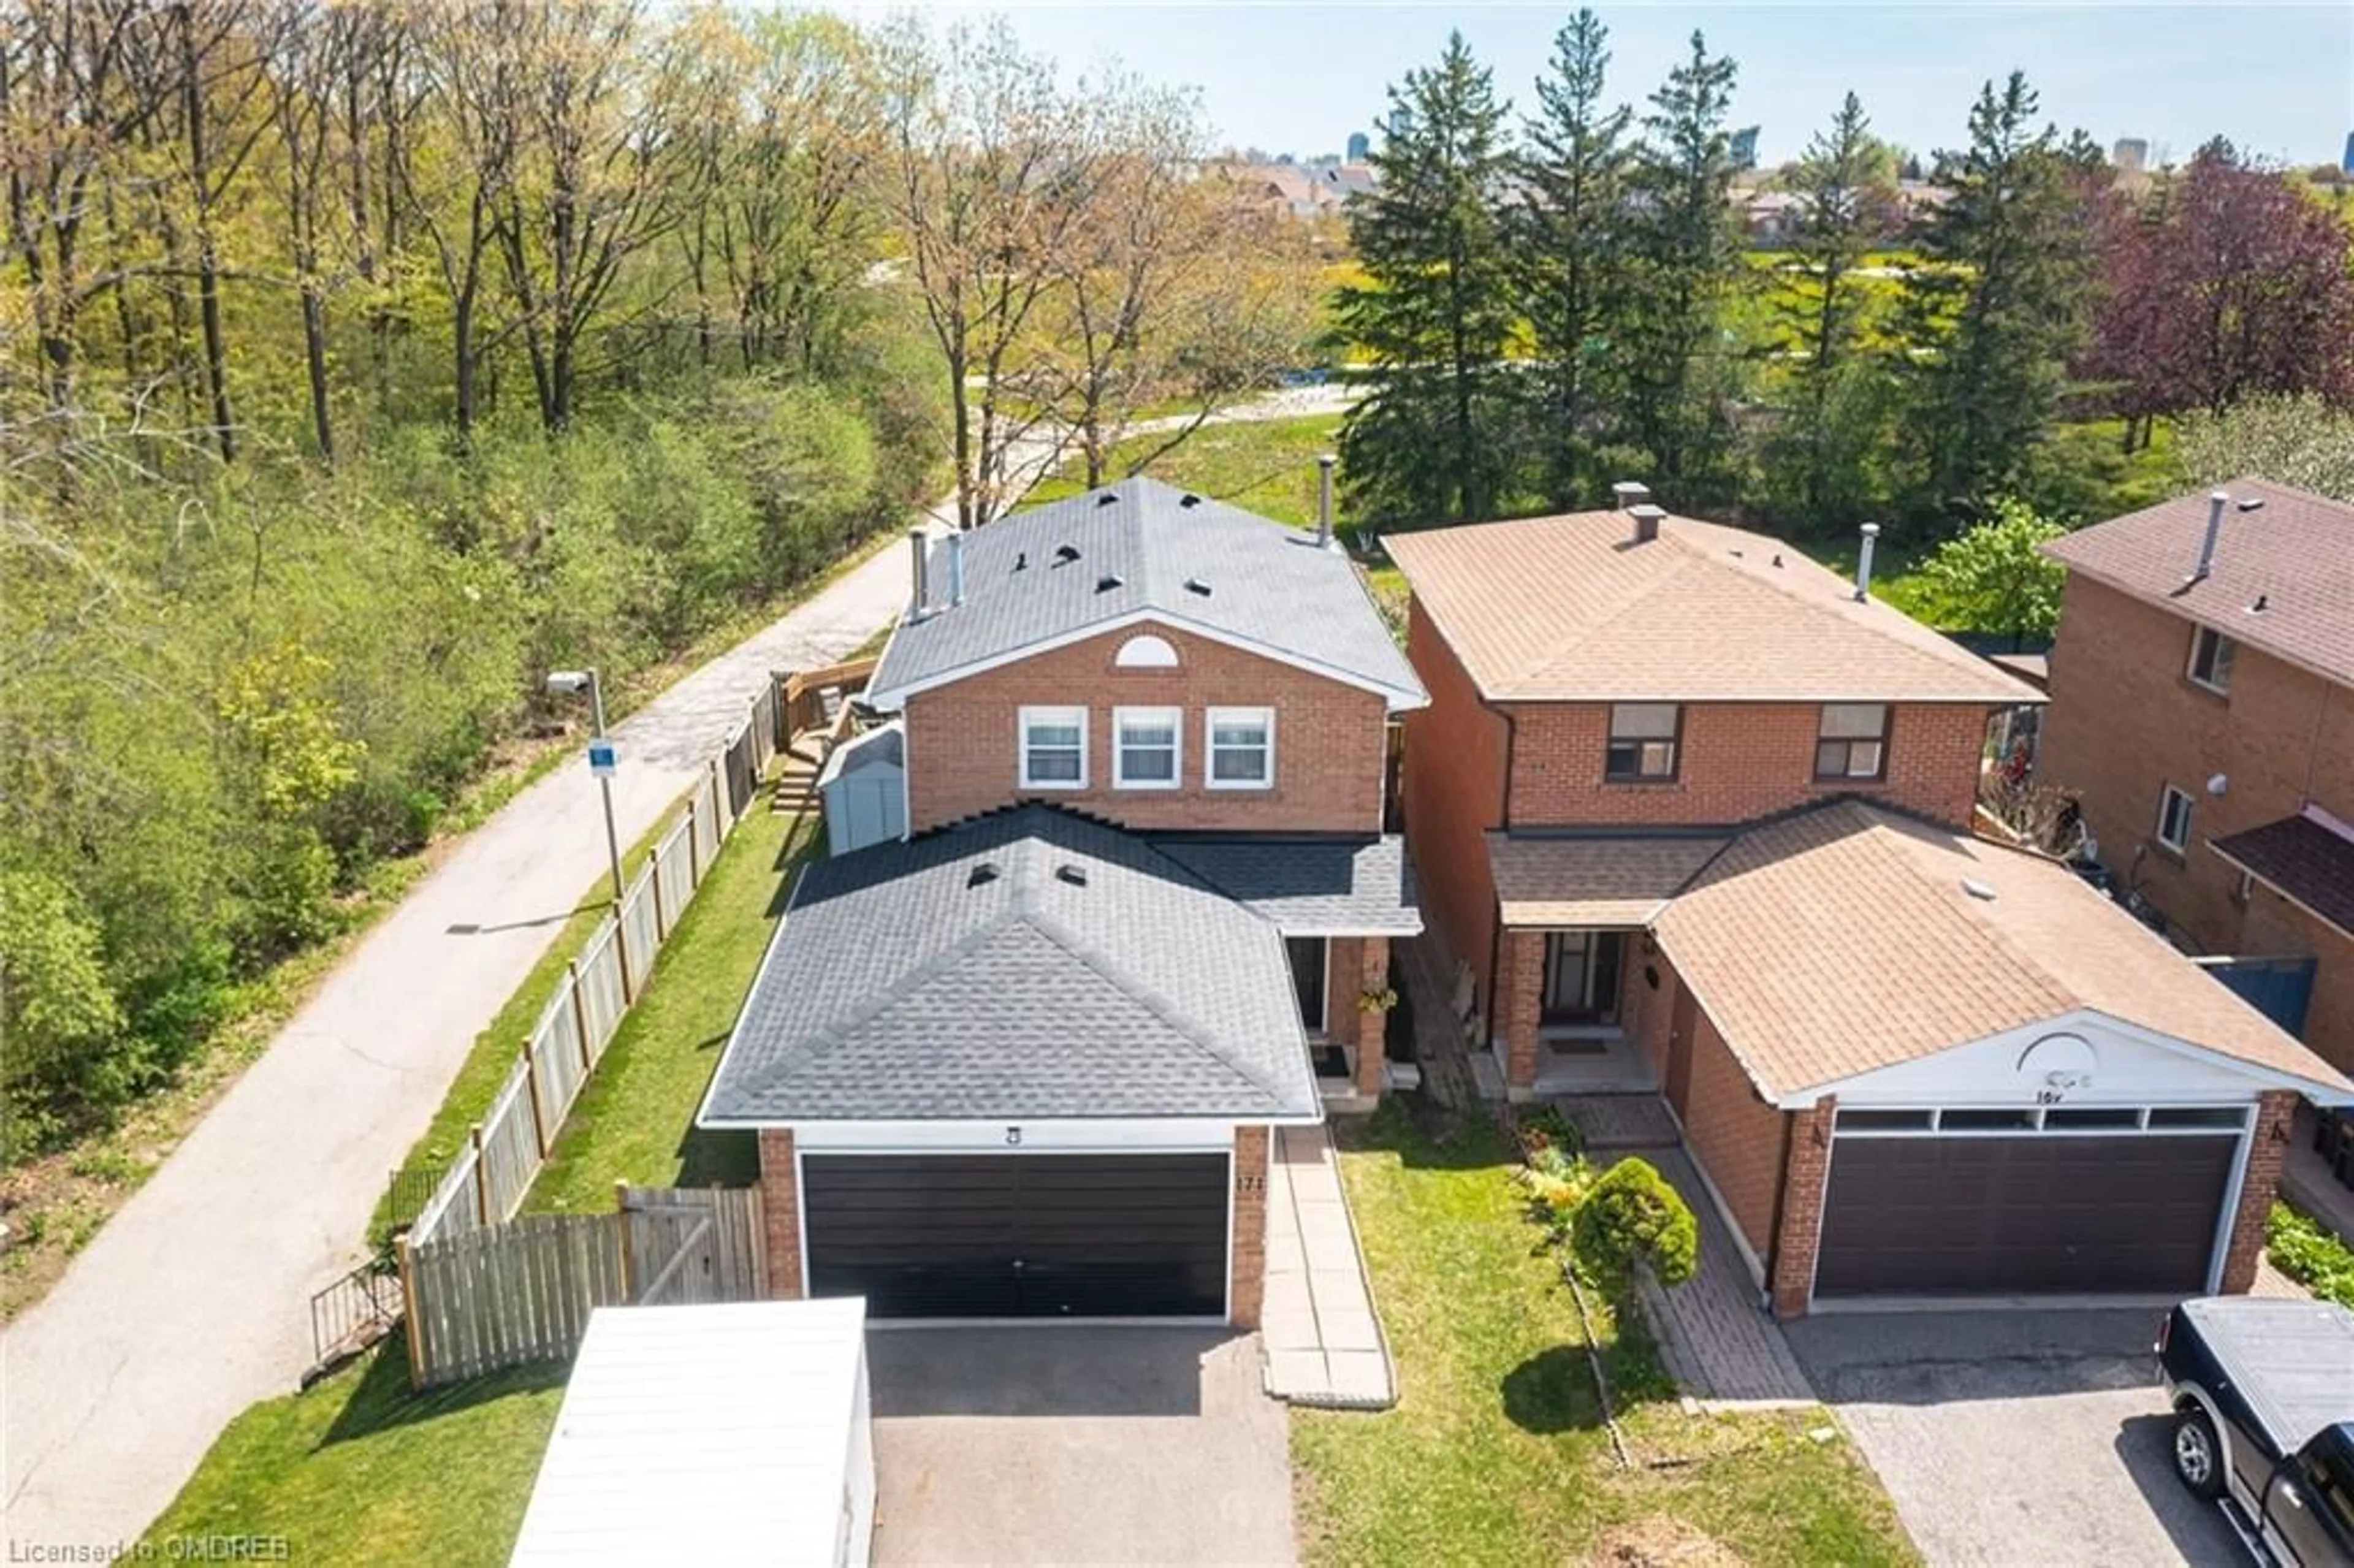 Frontside or backside of a home for 171 Simmons Blvd, Brampton Ontario L6V 3Y2